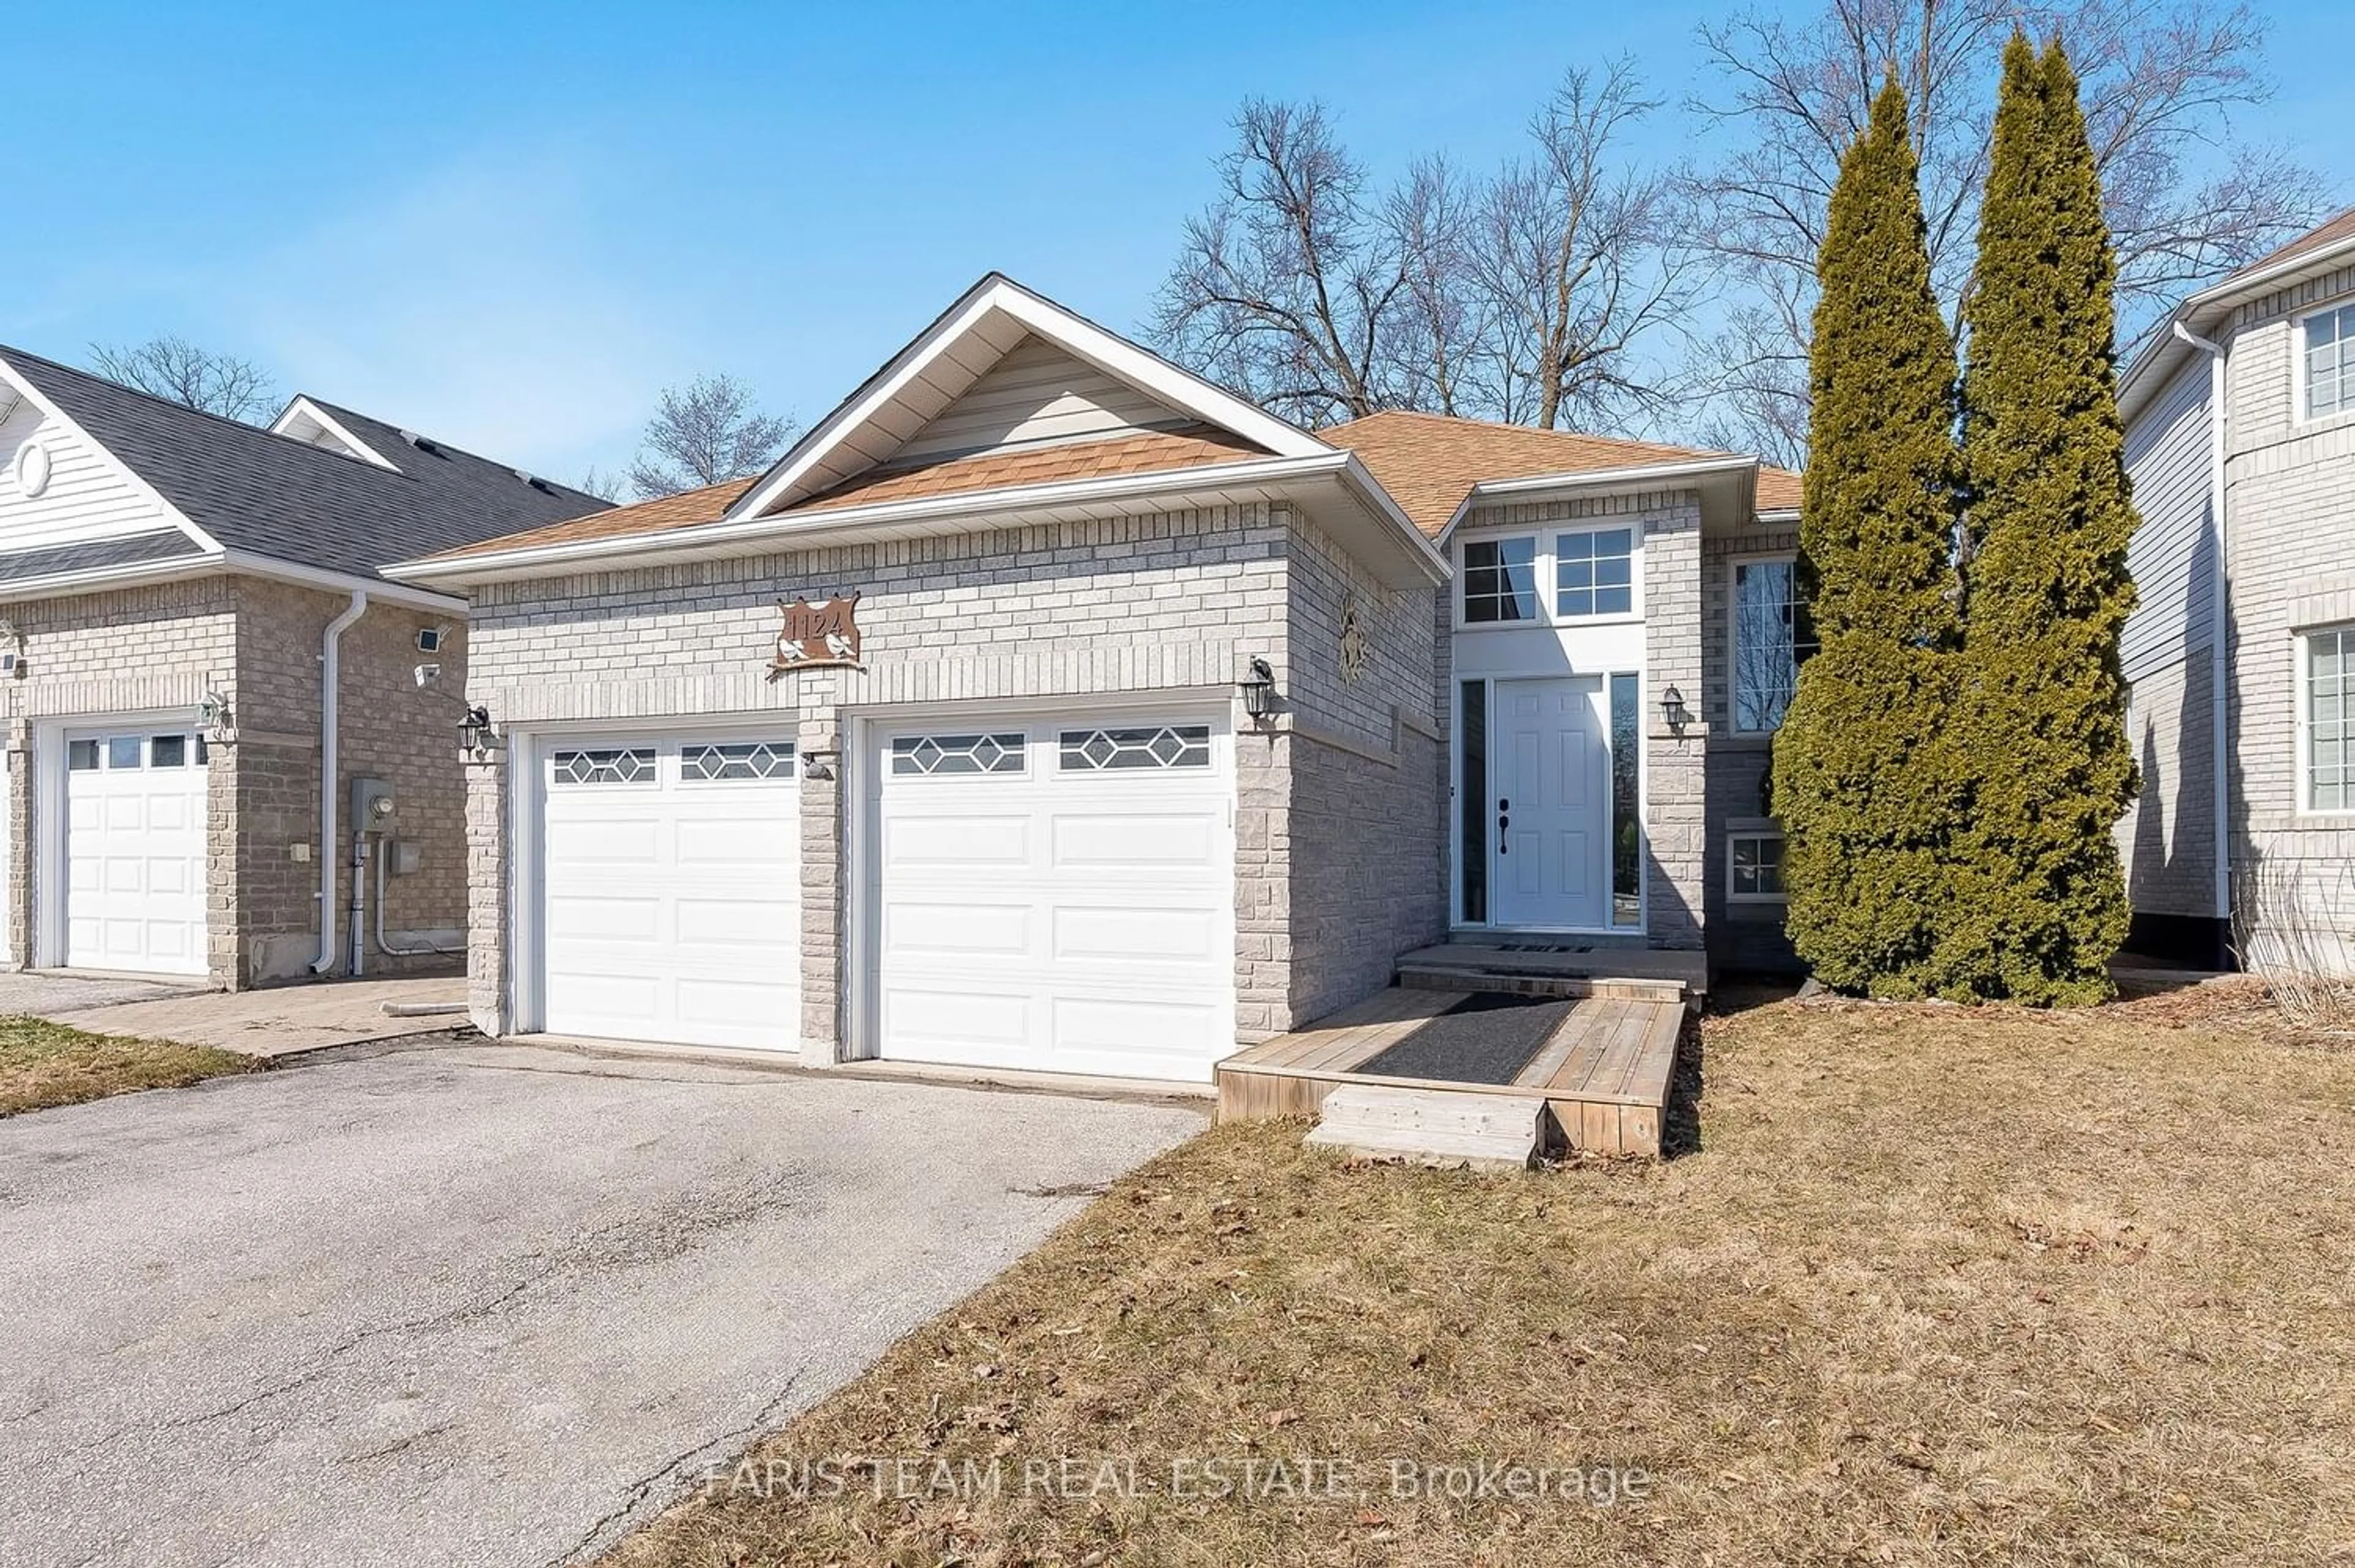 Home with unknown exterior material for 1124 Leslie Dr, Innisfil Ontario L9S 1T9